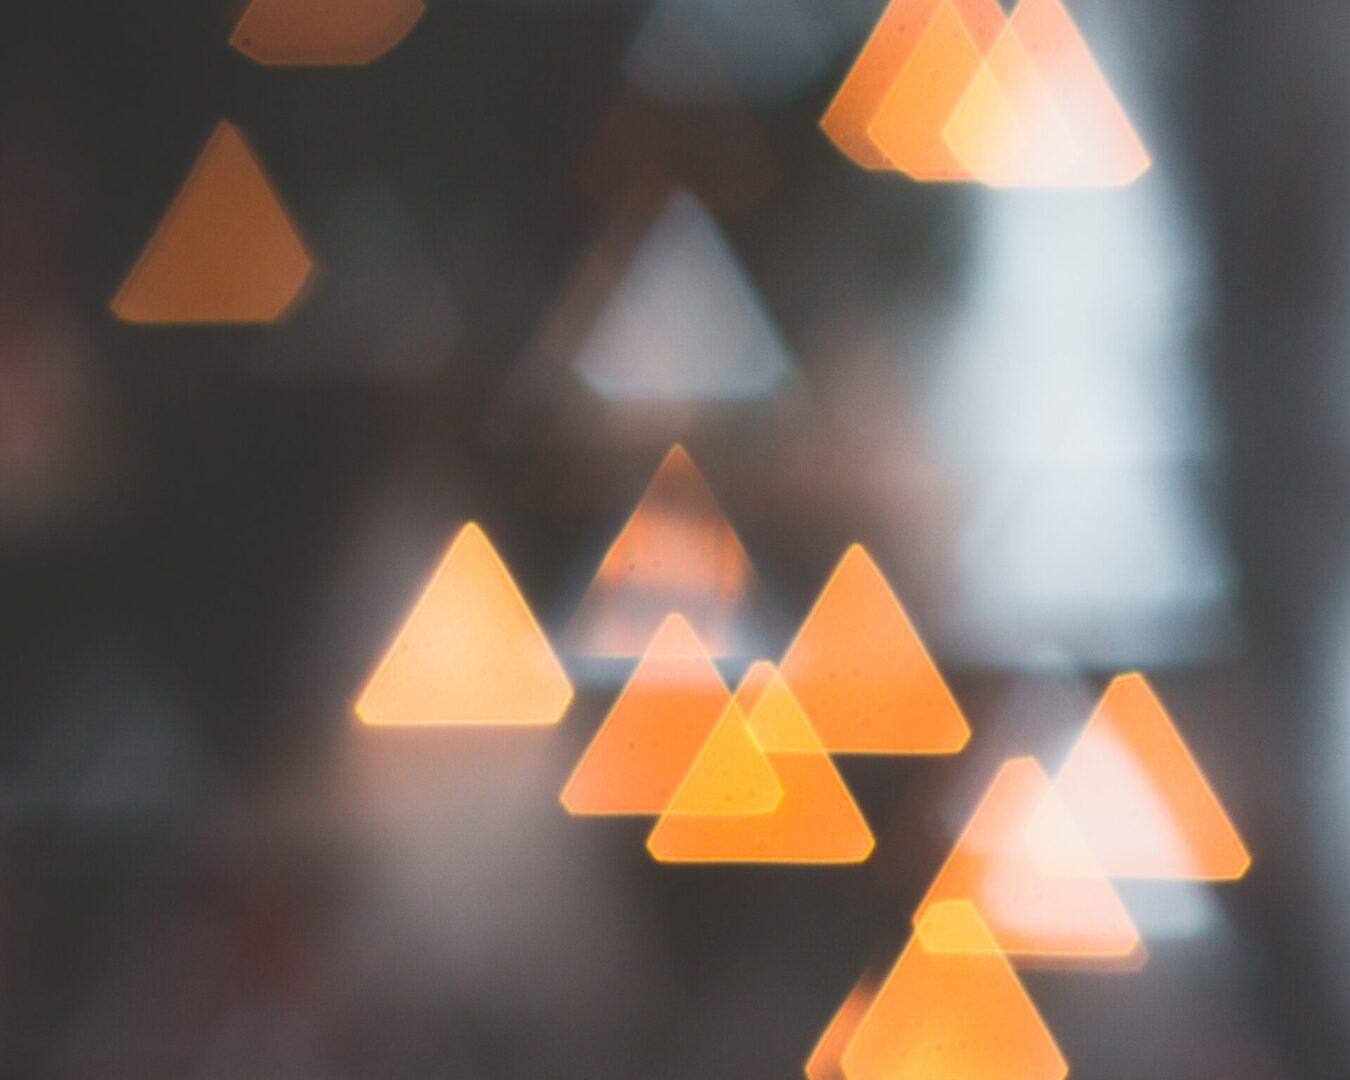 A blurry picture of some orange triangles